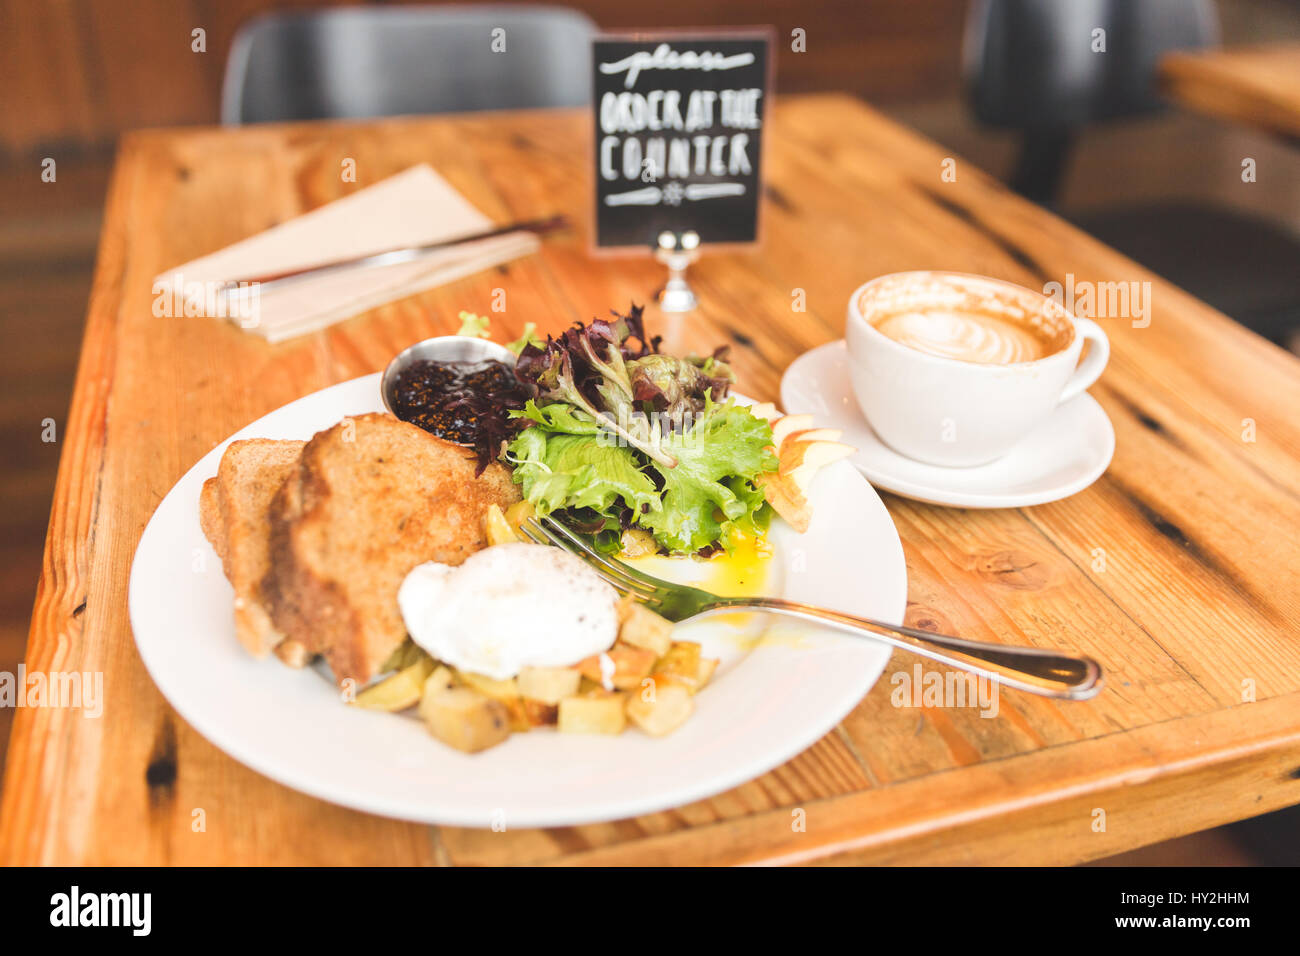 Eggs, potatoes, lettuce, toast and coffee in a breakfast meal spread. Upscale cafe setting. Stock Photo